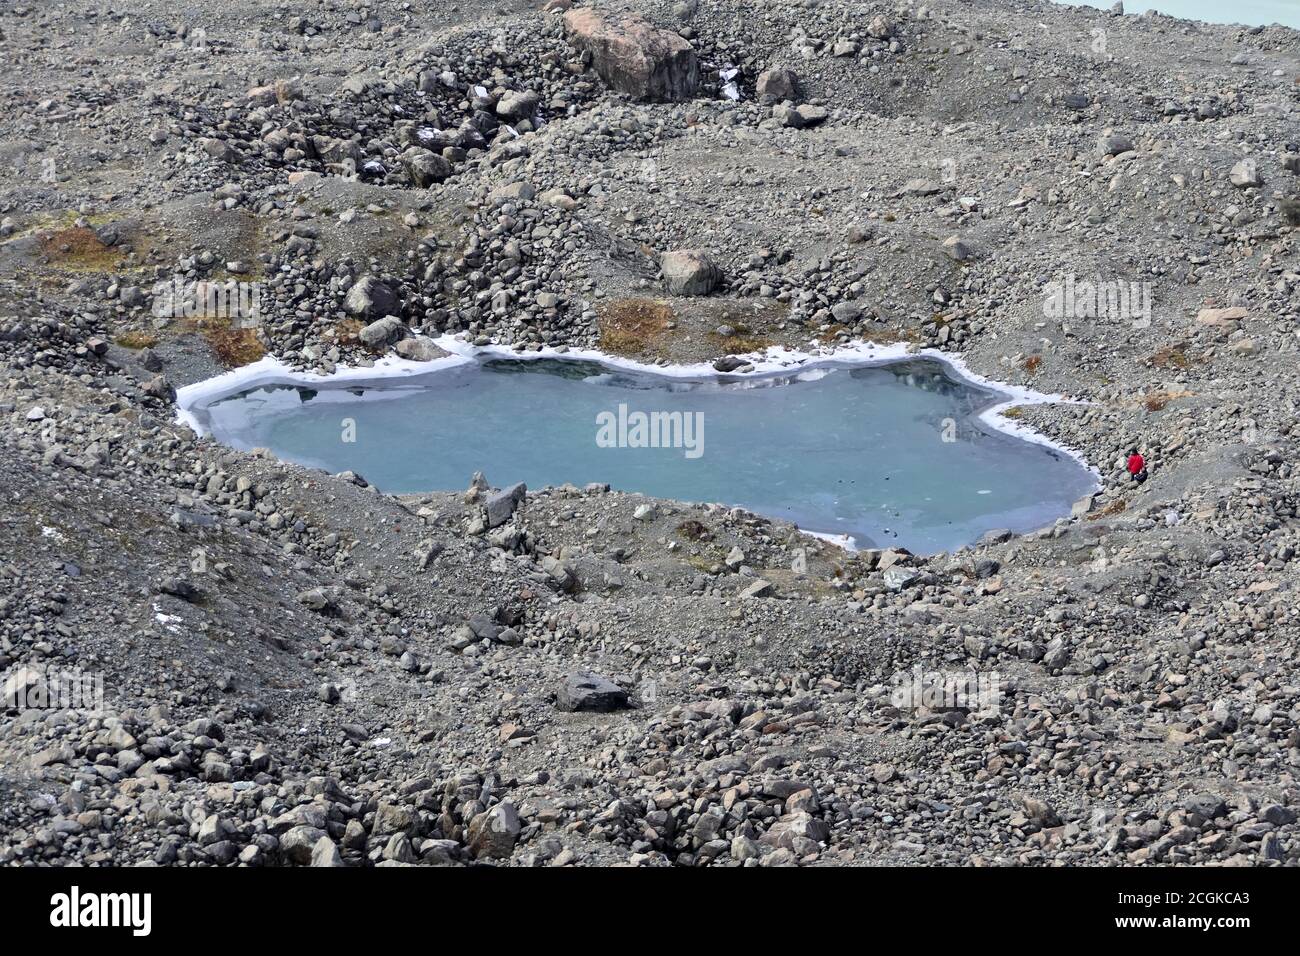 Aerial view of a small half frozen blue lake surrounded by a stony landscape Stock Photo